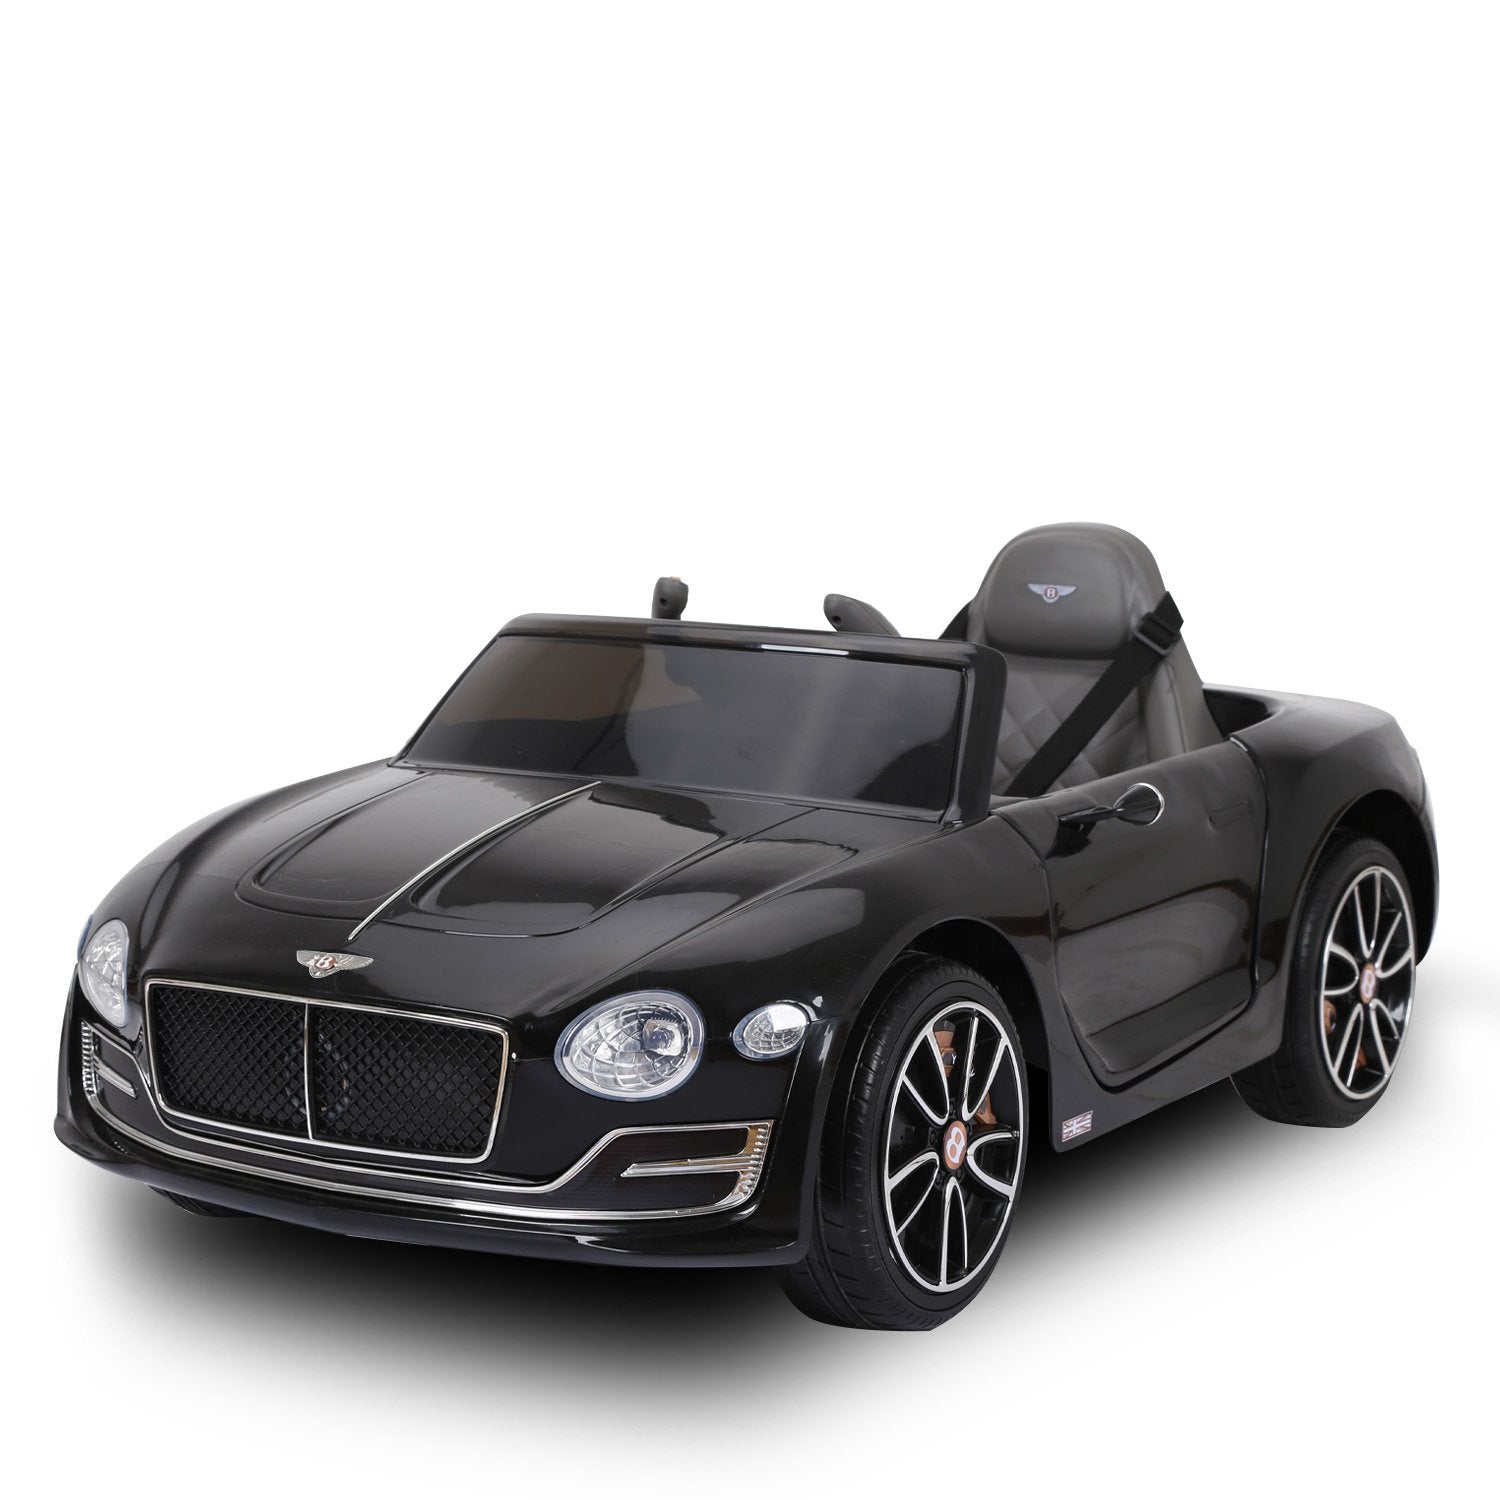 Bentley Exp 12 Licensed Speed 6E Electric Kids Ride-On Car (Black)